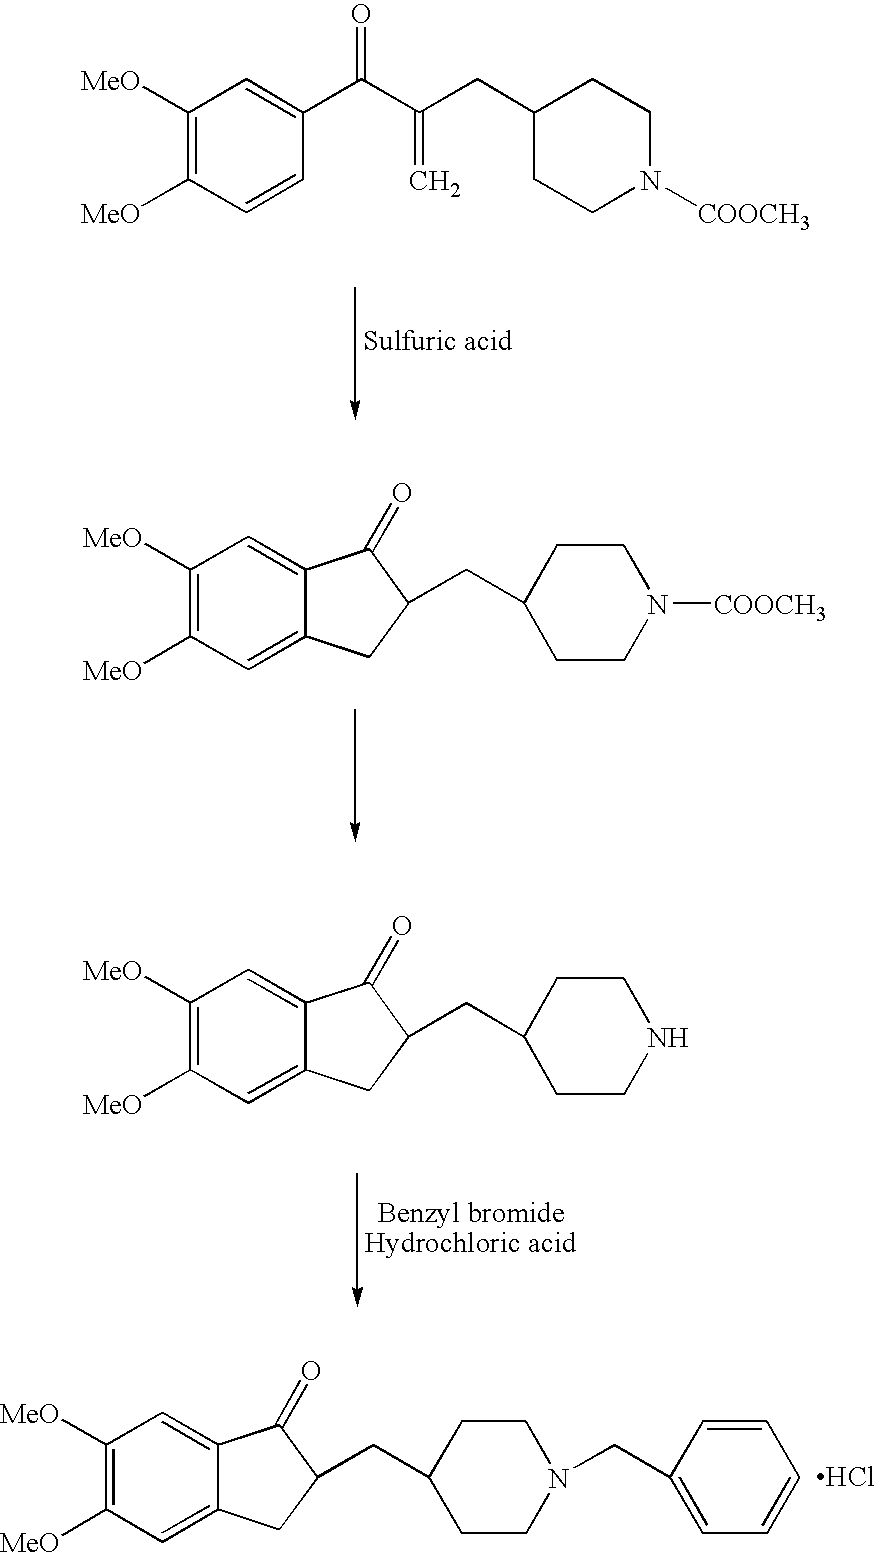 Preparation of intermediates for acetyl cholinesterase inhibitors